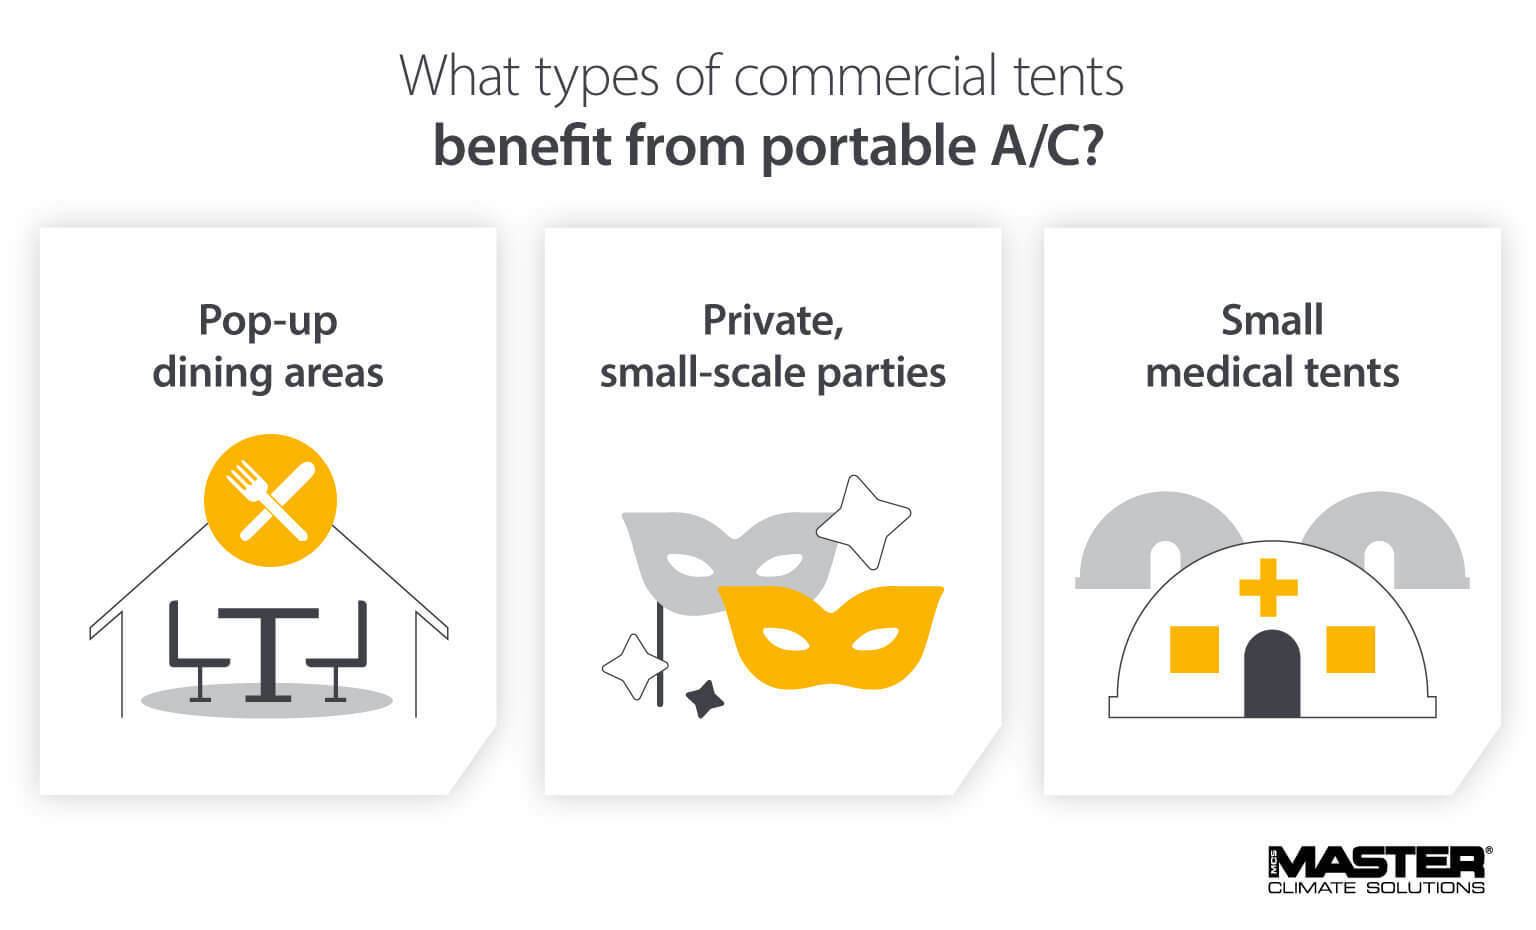 Infographic: Benefits of using portable air conditioning units for pop-up dining areas, private small-scale parties, and small medical tents